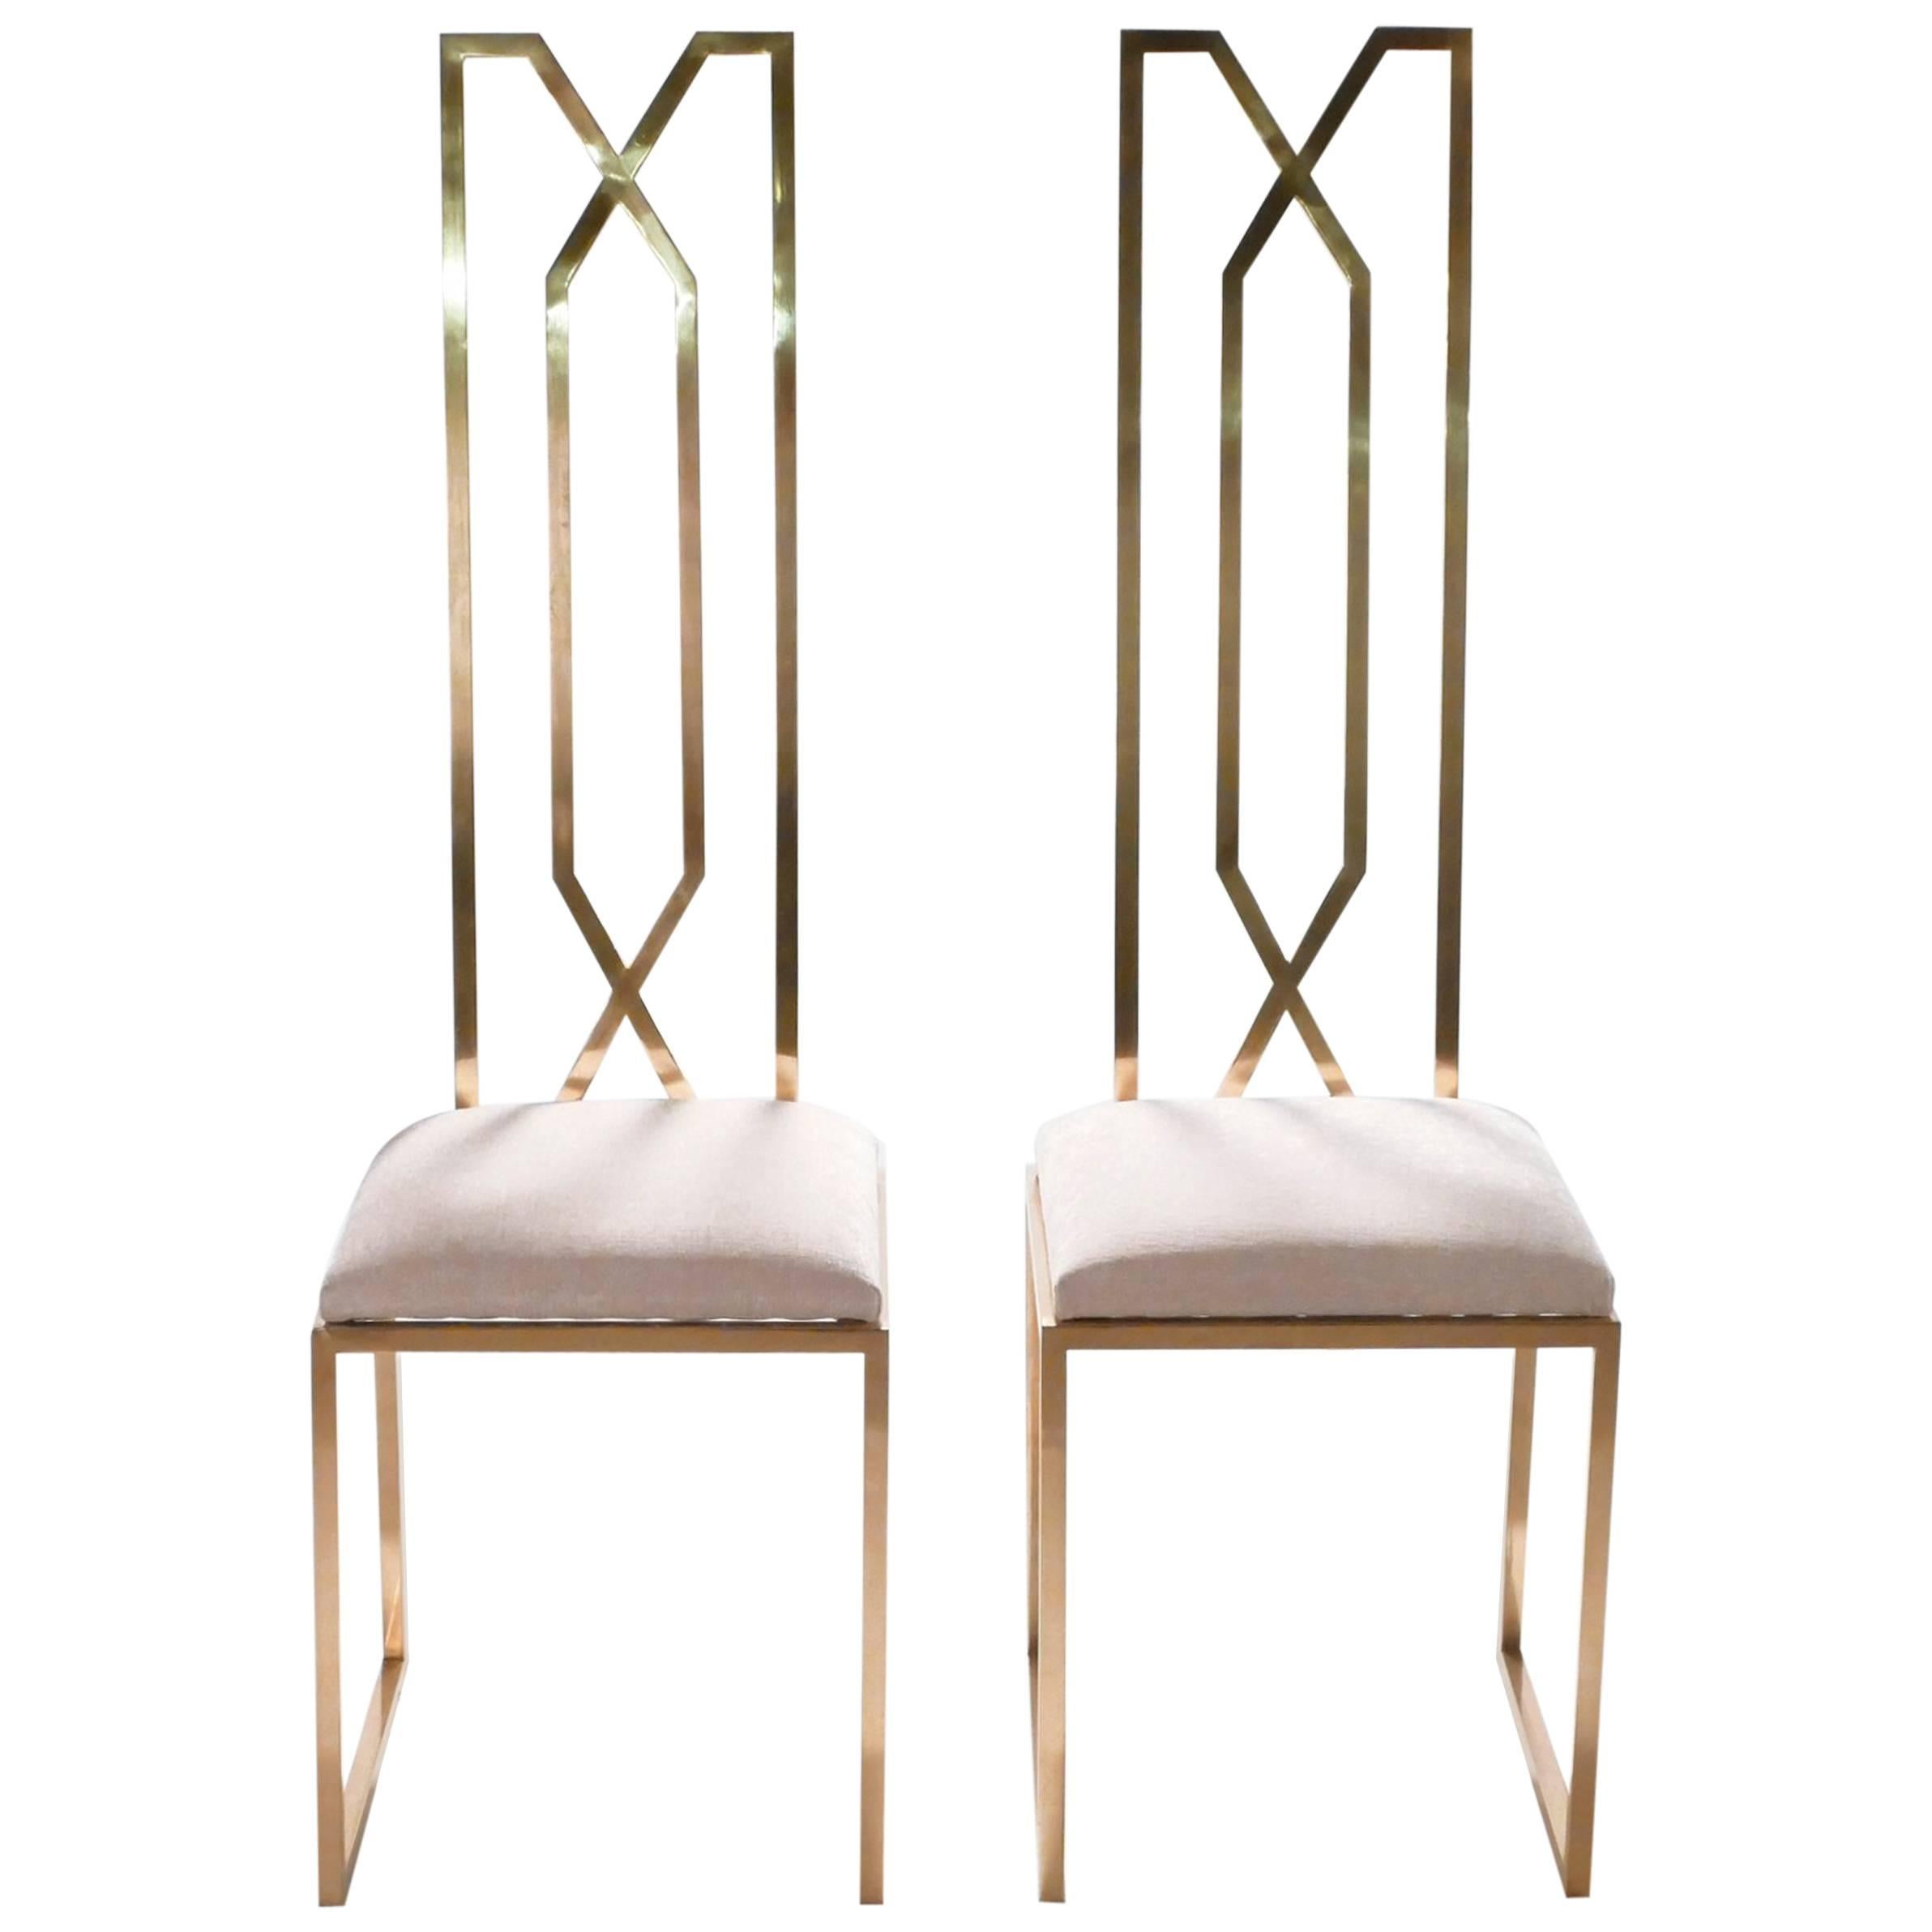 Rare Pair of Chairs by Willy Rizzo for Maison Jansen, 1970s